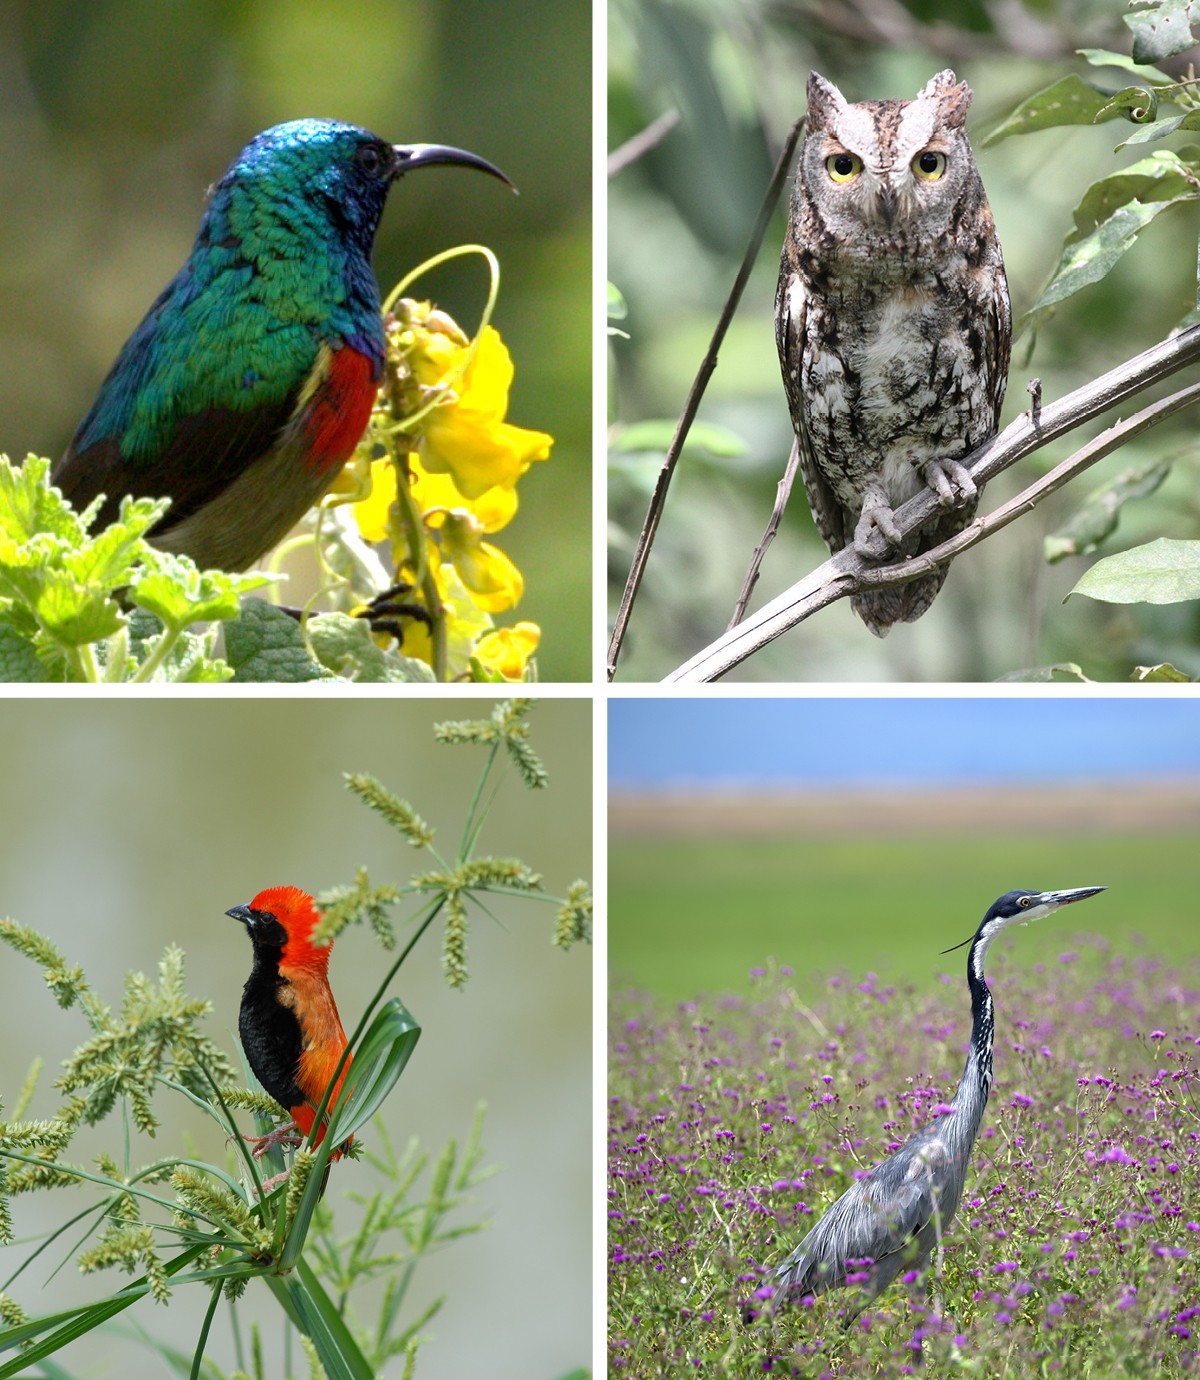 The abundance of food in the green season results in an influx of migratory species, adding to an already impressive bird list.